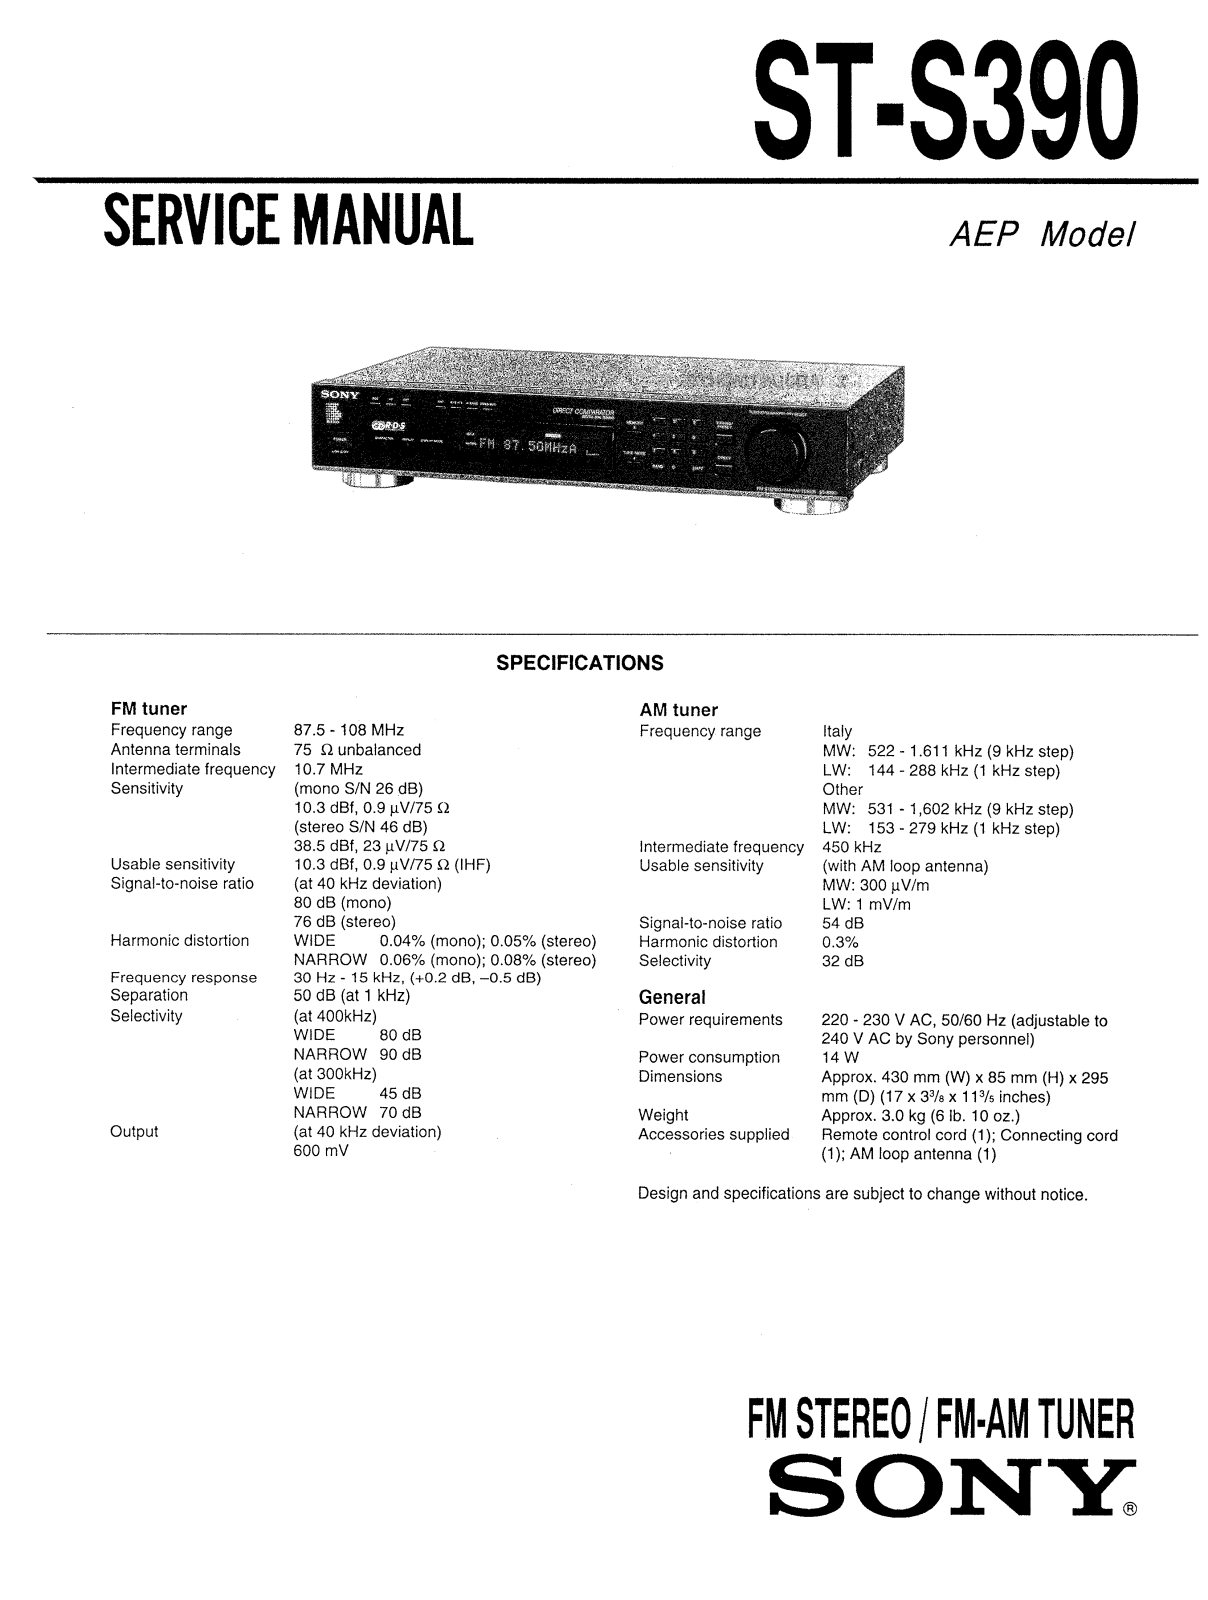 Sony STS-390 Service manual